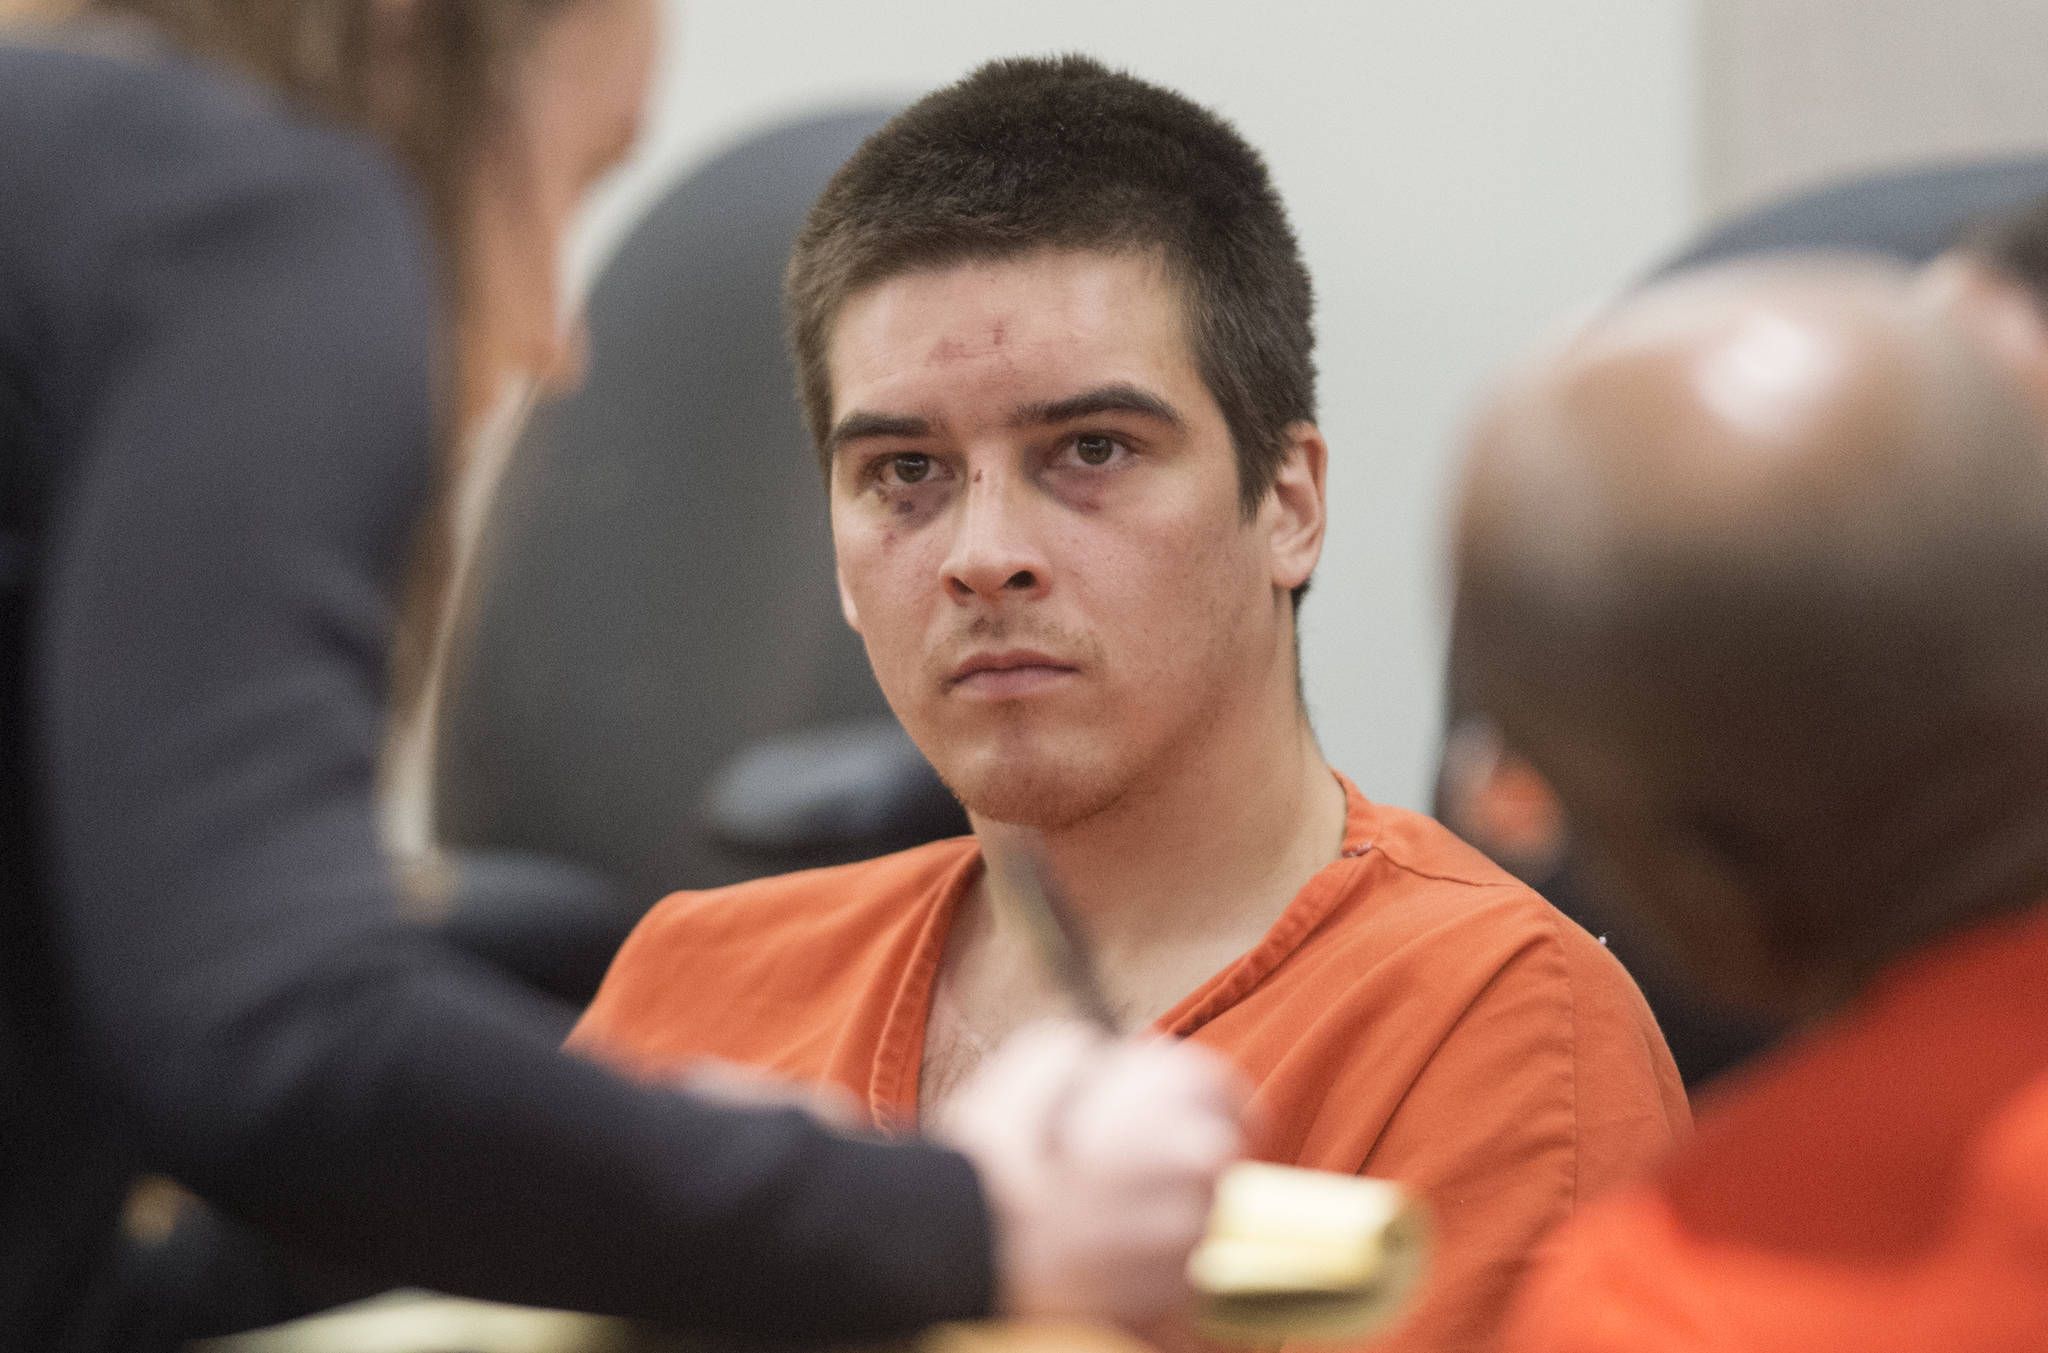 Casey Joseph Yakovich, 26, appears in Juneau District Court for an arraignment on charges of assault on Wednesday. (Michael Penn | Juneau Empire)